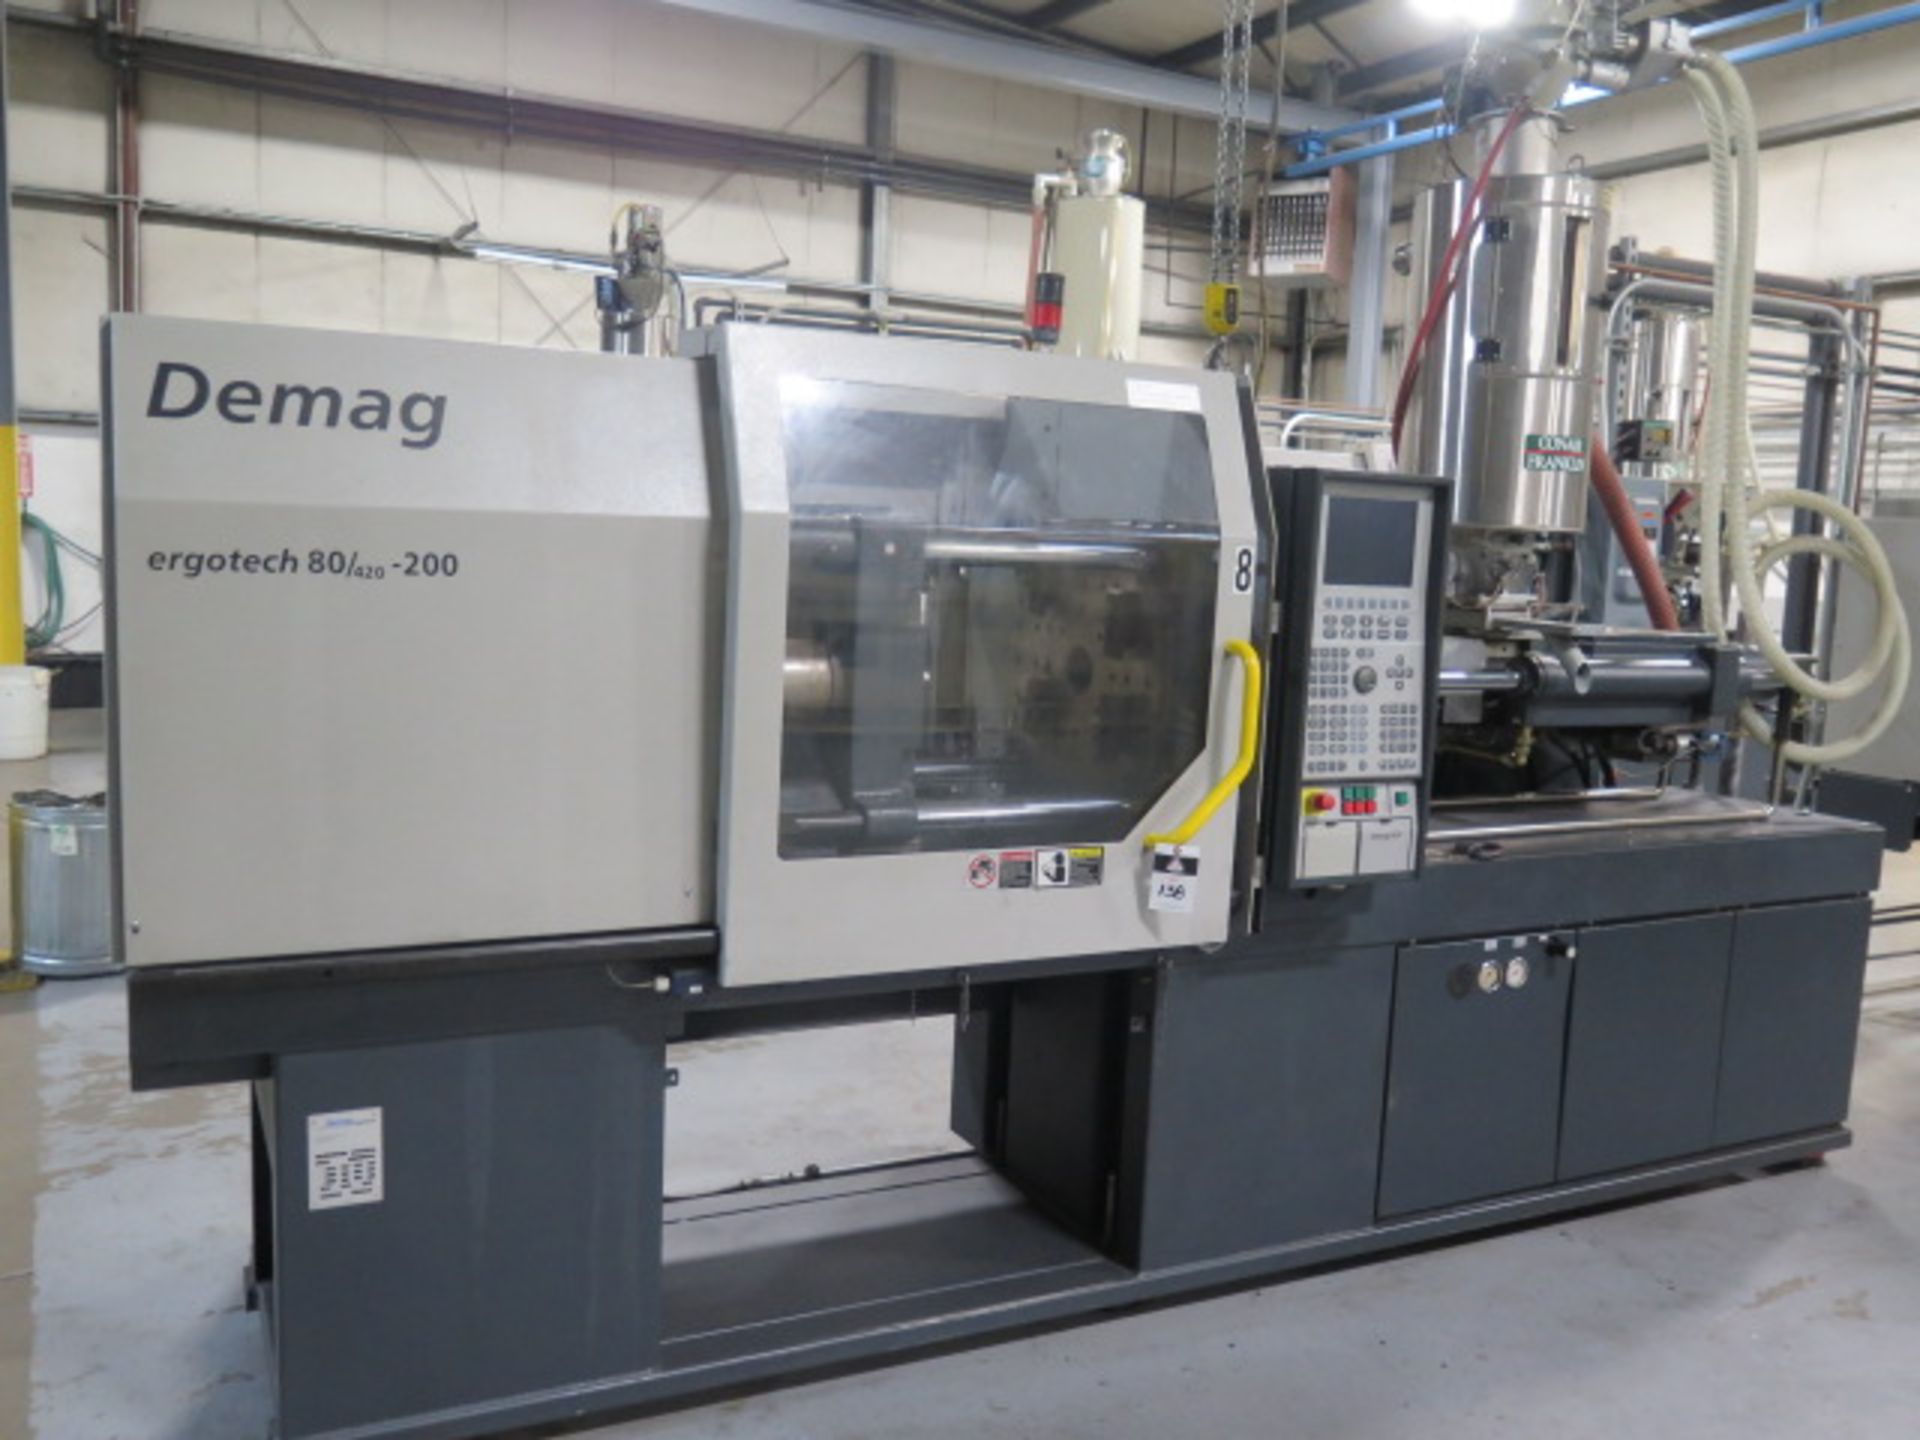 Demag Ergotech 800/420-200 80-Ton Plastic Injection Molding s/n 7153-0016 w/ Demag NC4, SOLD AS IS - Image 2 of 20